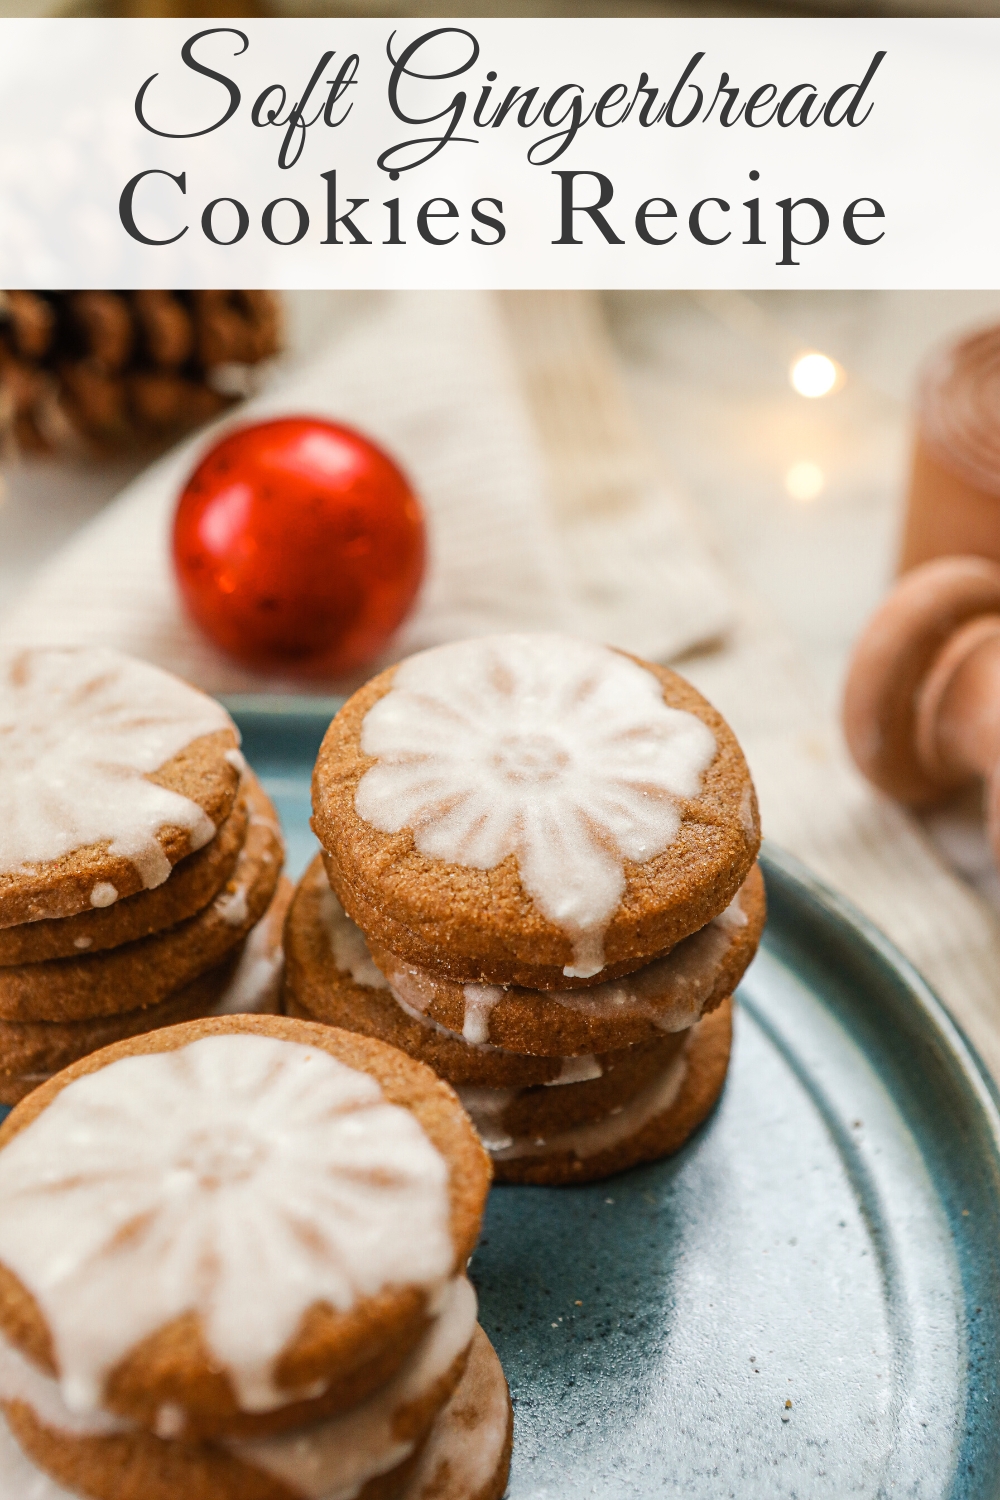 Recipe for soft gingerbread cookies